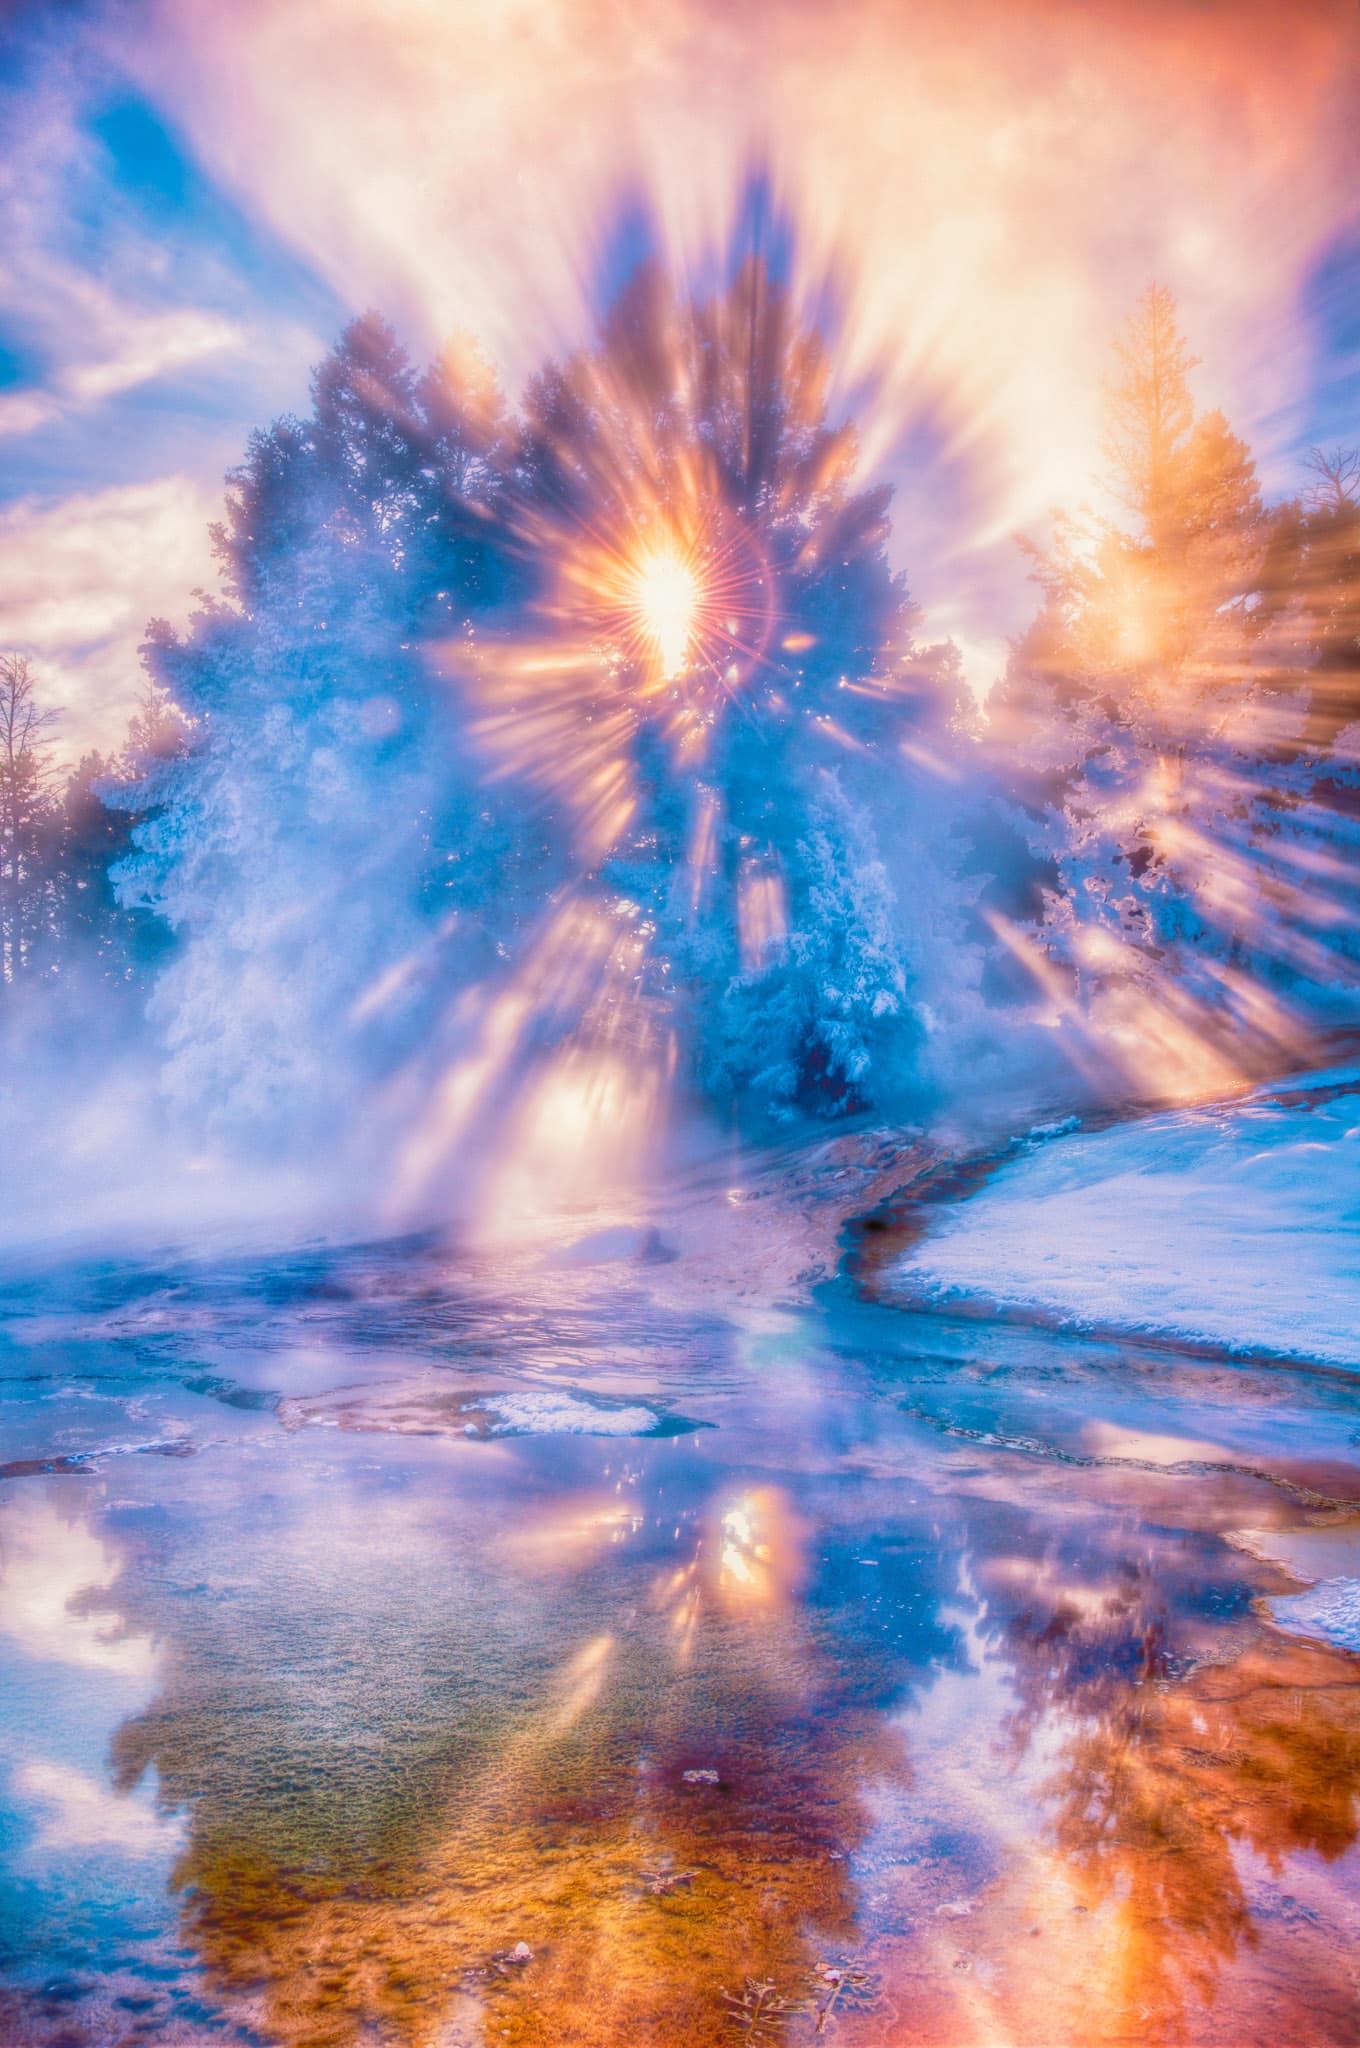 Sunlight through a tree radiate through the branches, casting shadows on the steam rising from a thermal pool in the Upper Terraces area of Mammoth Hot Springs in Yellowstone National Park.